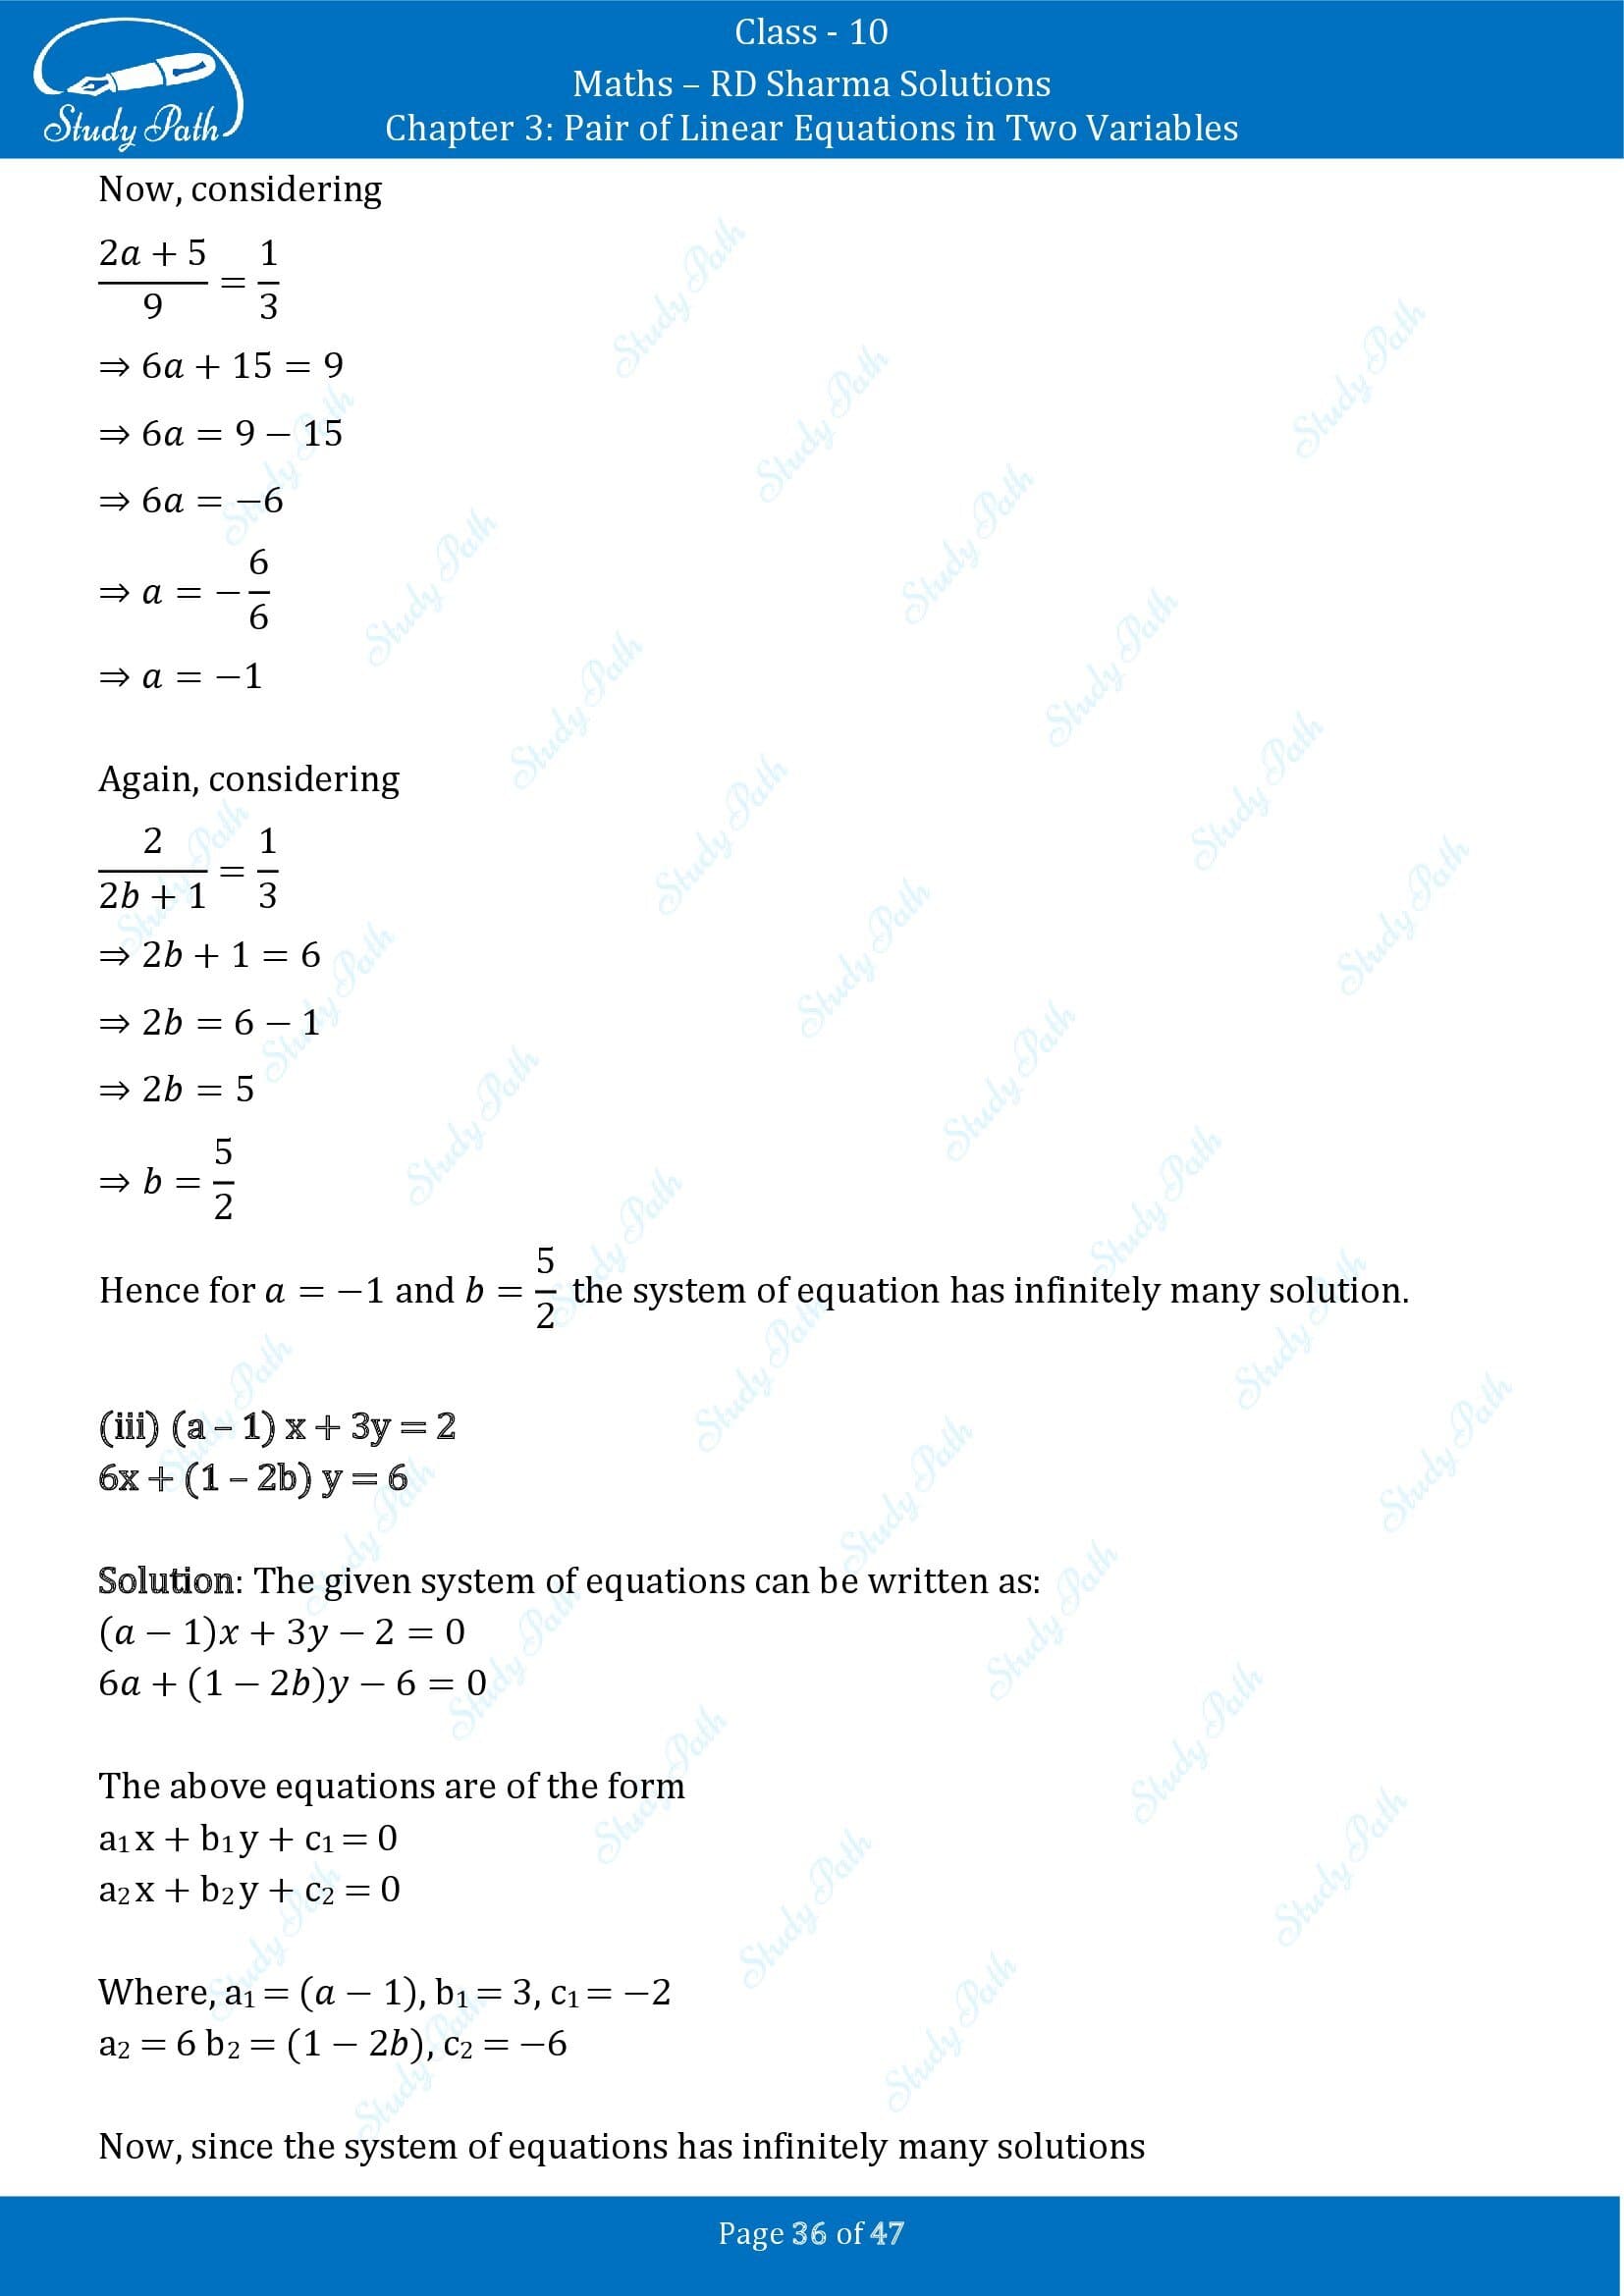 RD Sharma Solutions Class 10 Chapter 3 Pair of Linear Equations in Two Variables Exercise 3.5 00036